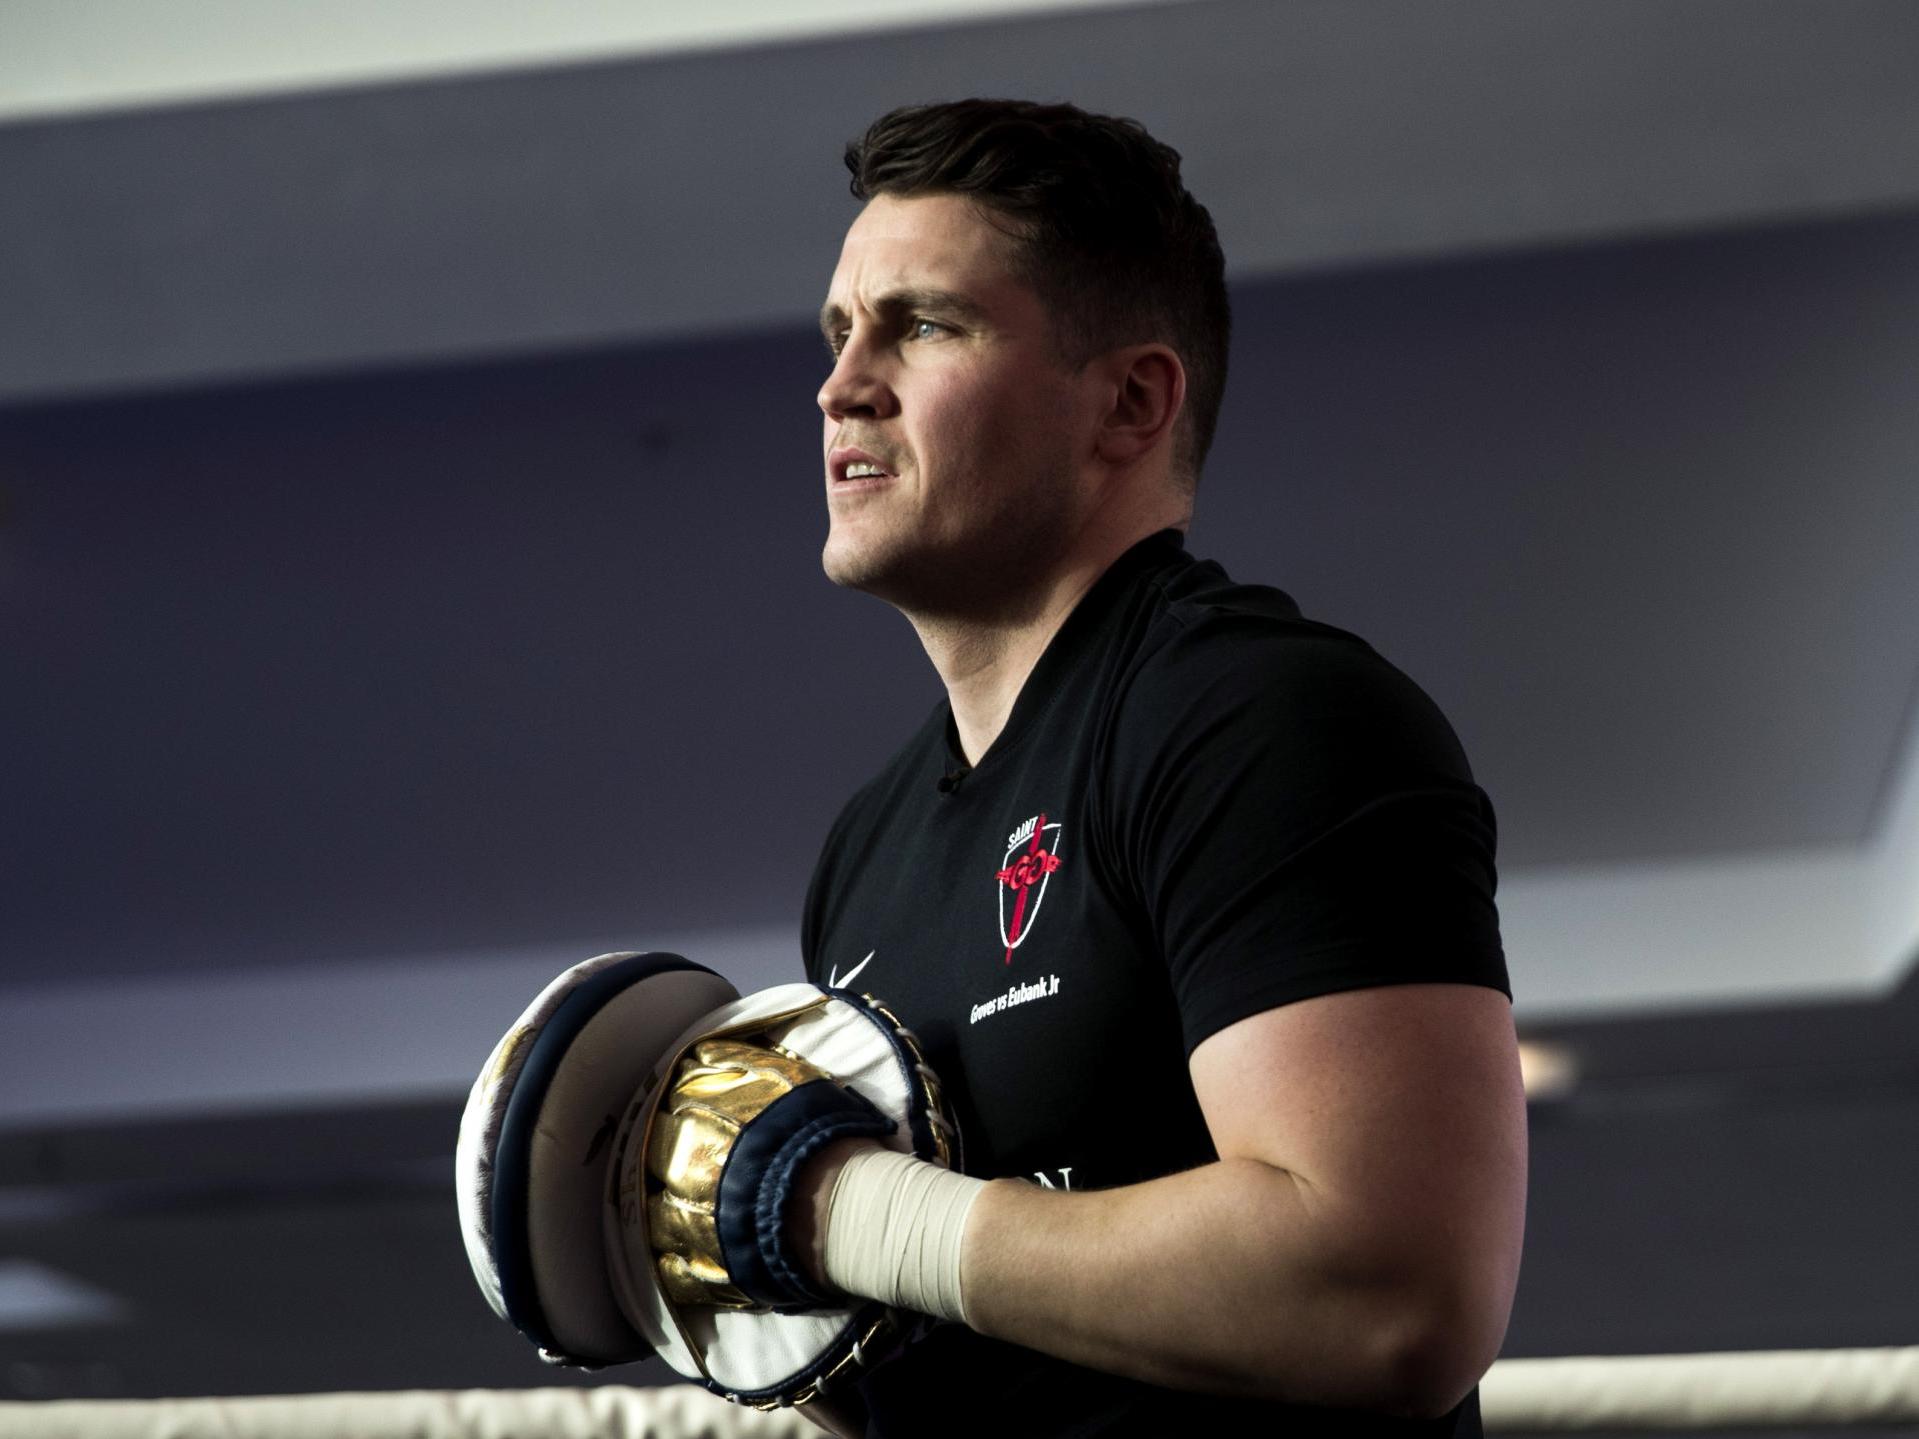 McGuigan has battled with tragedy over the last month